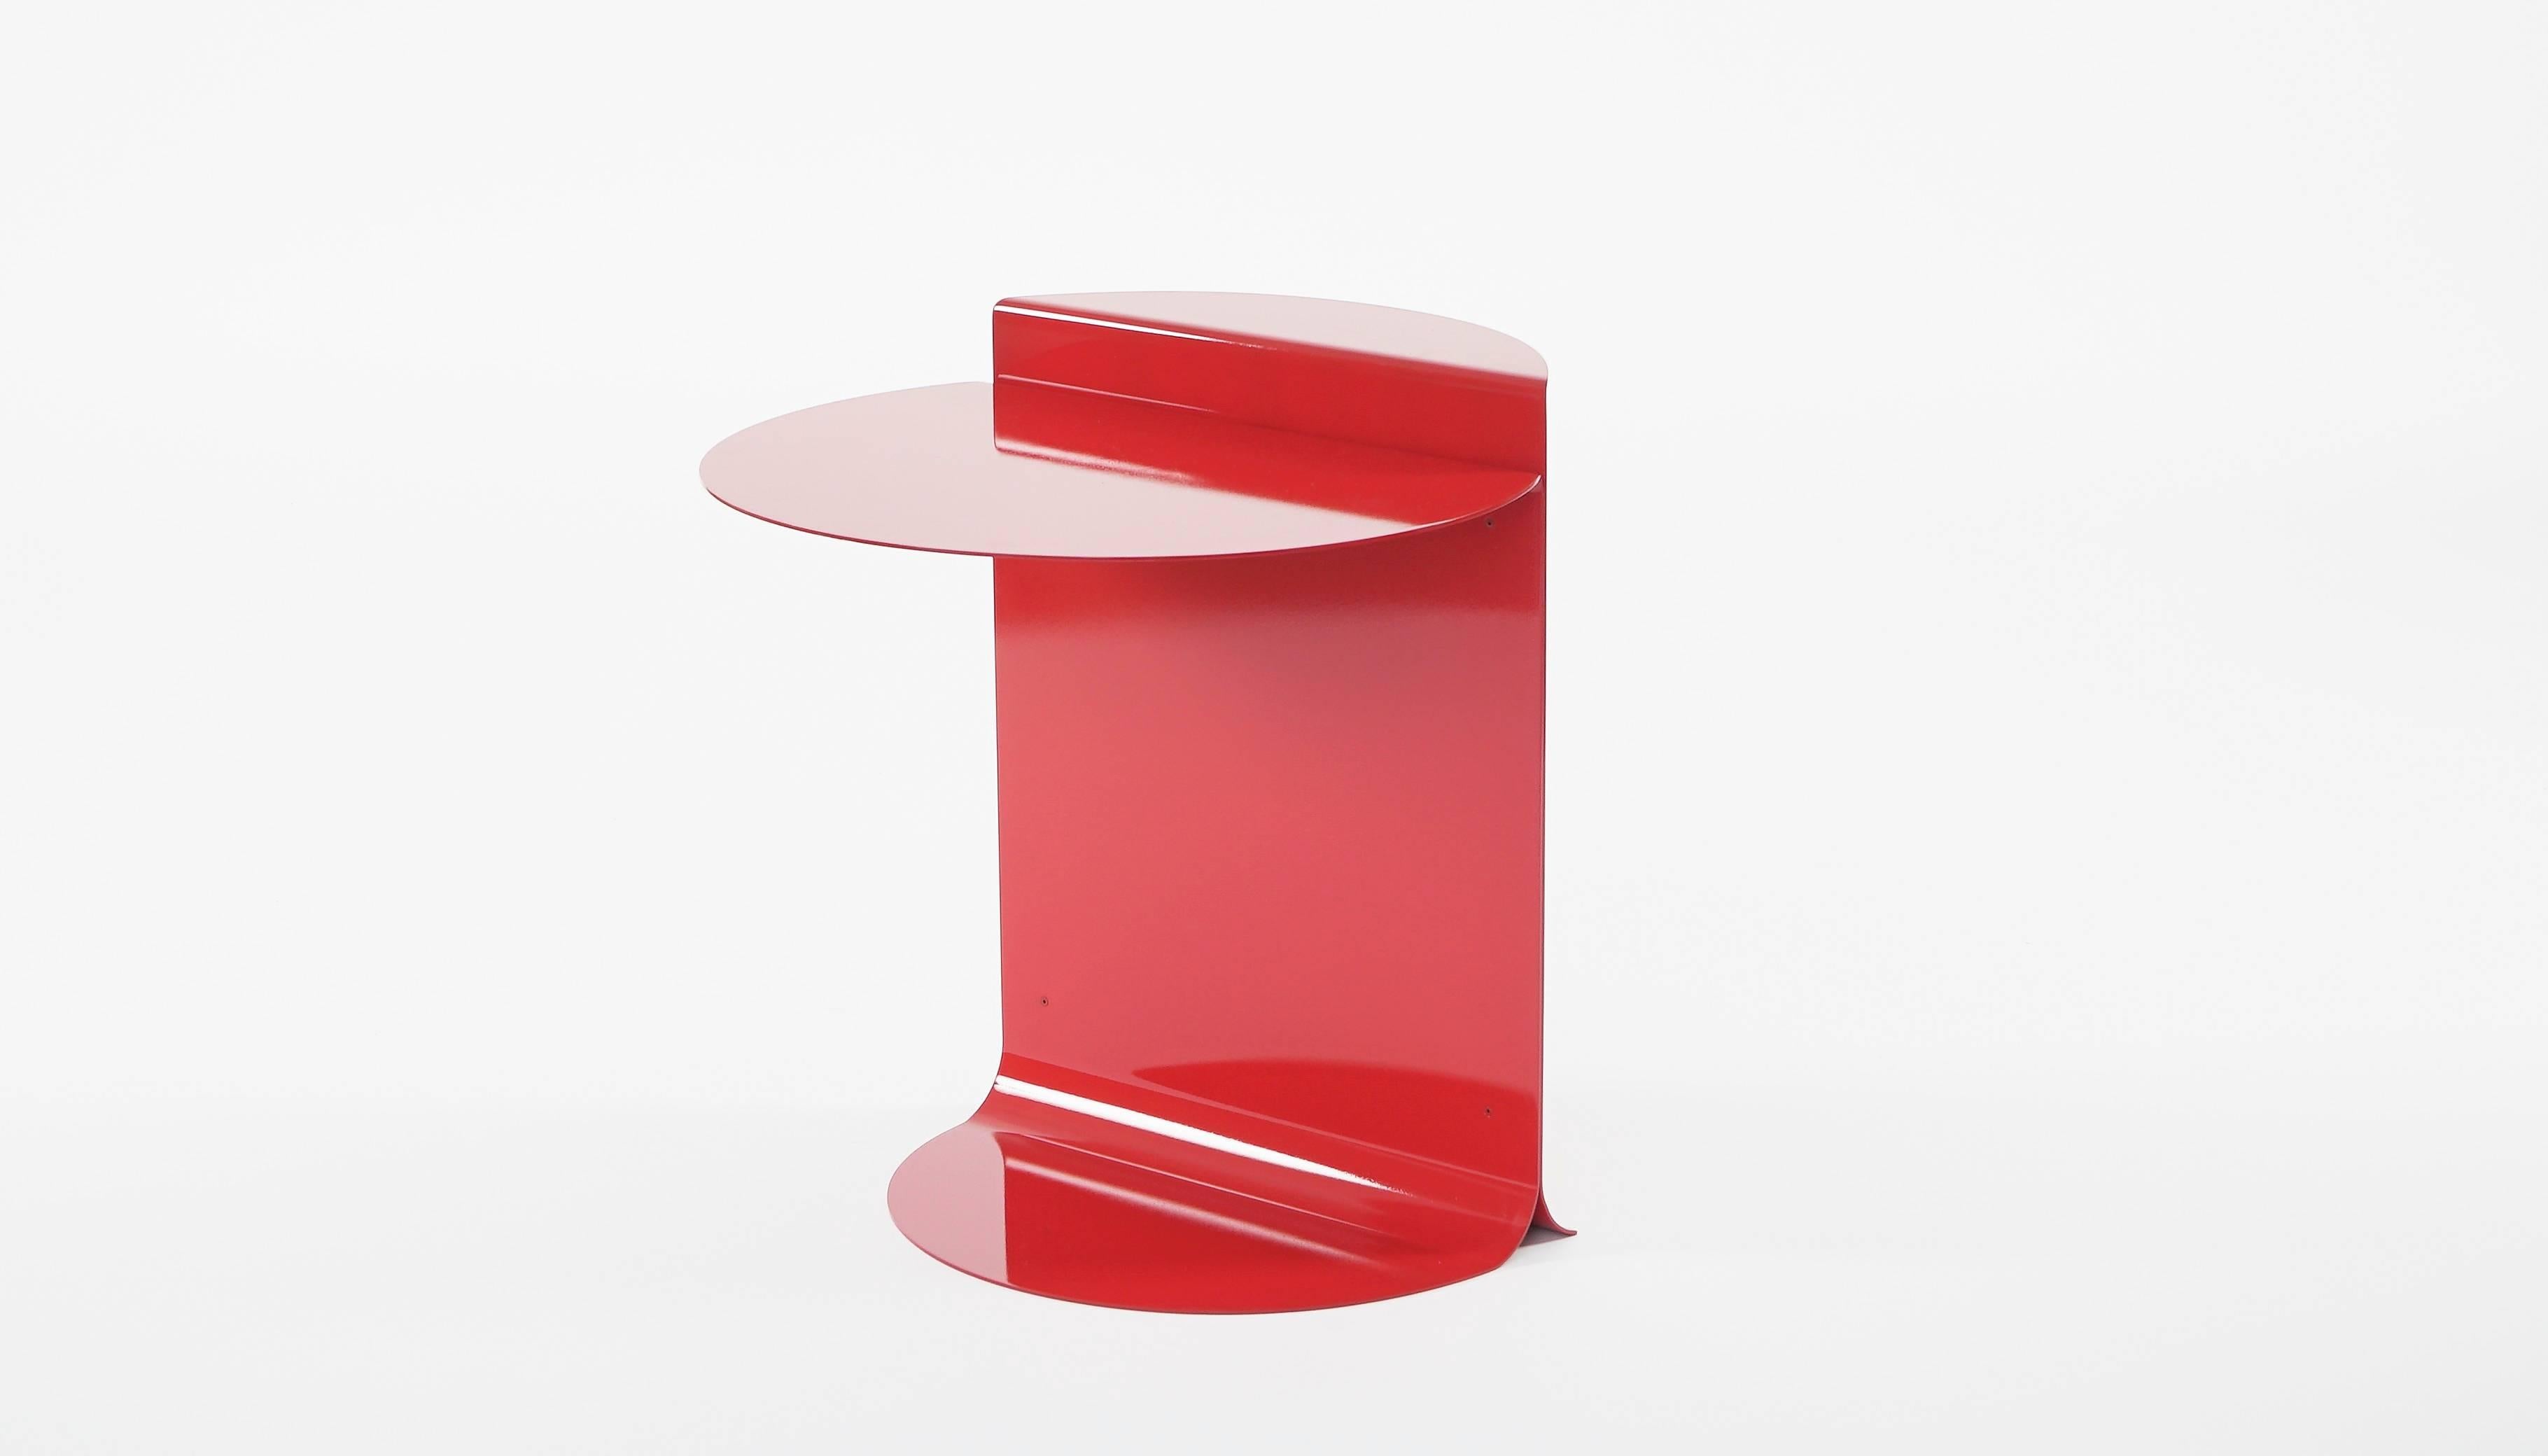 American O Table in Stainless Steel (Red) by Estudio Persona